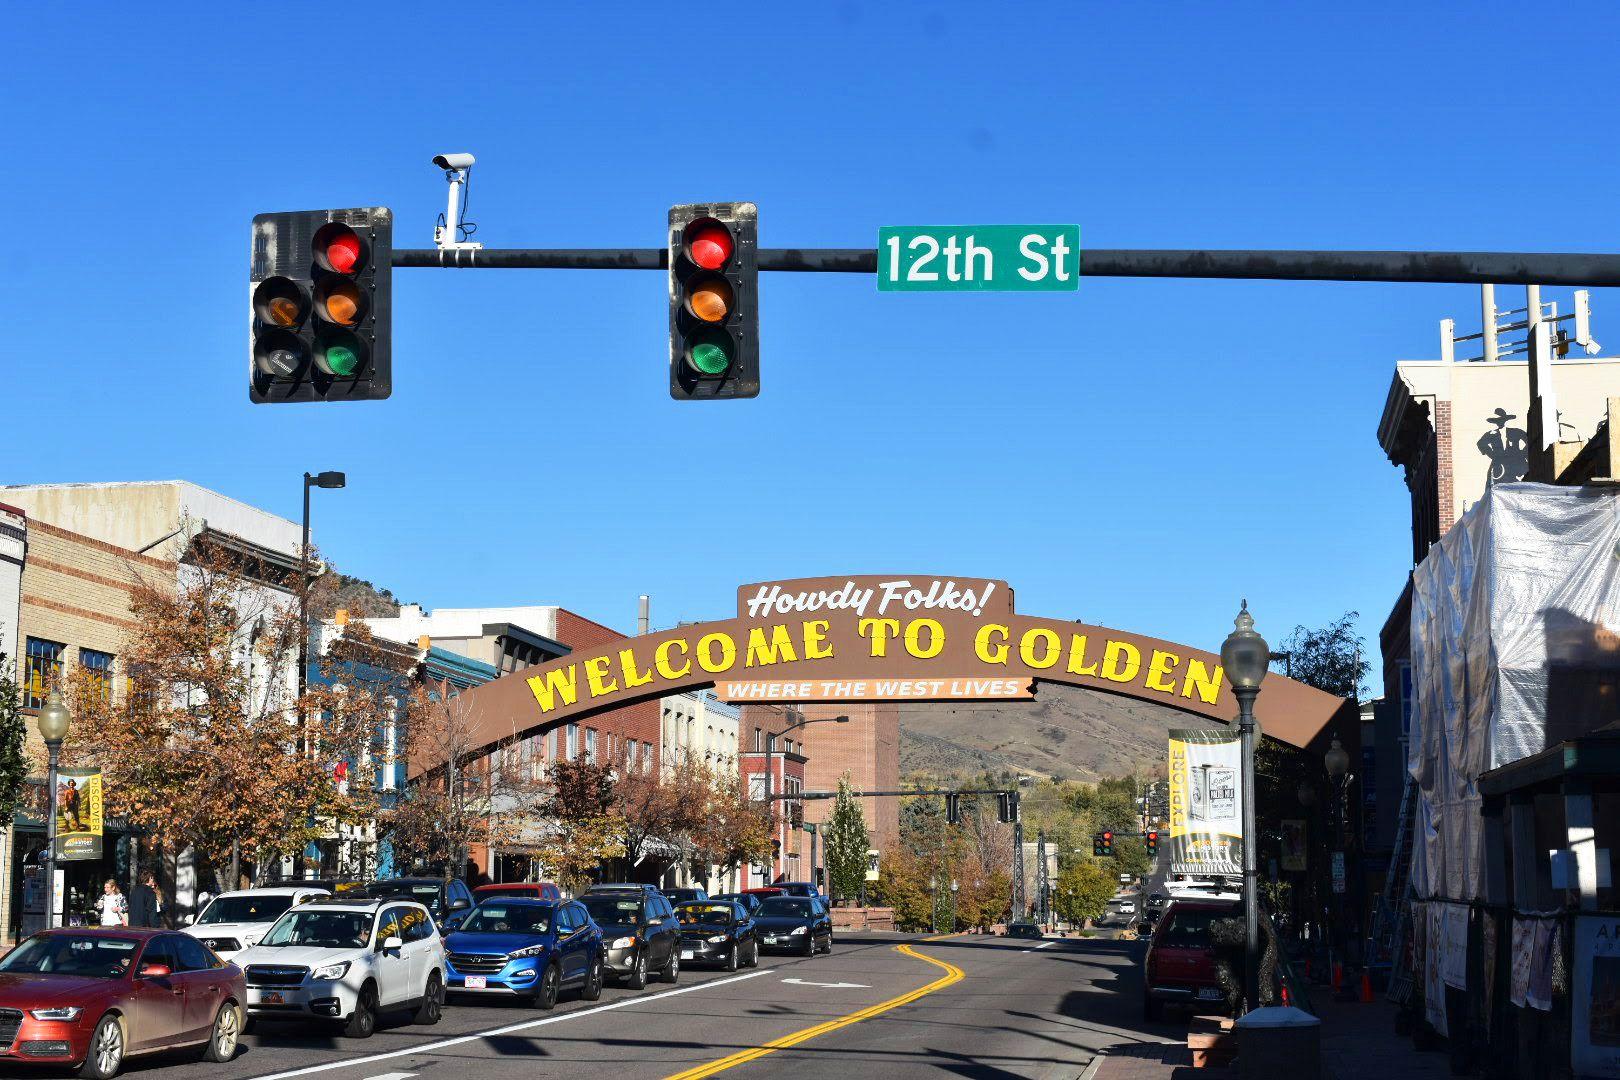 A street in Golden, CO. A large arch extends over the road and reads "Howdy Folks, Welcome to Golden"